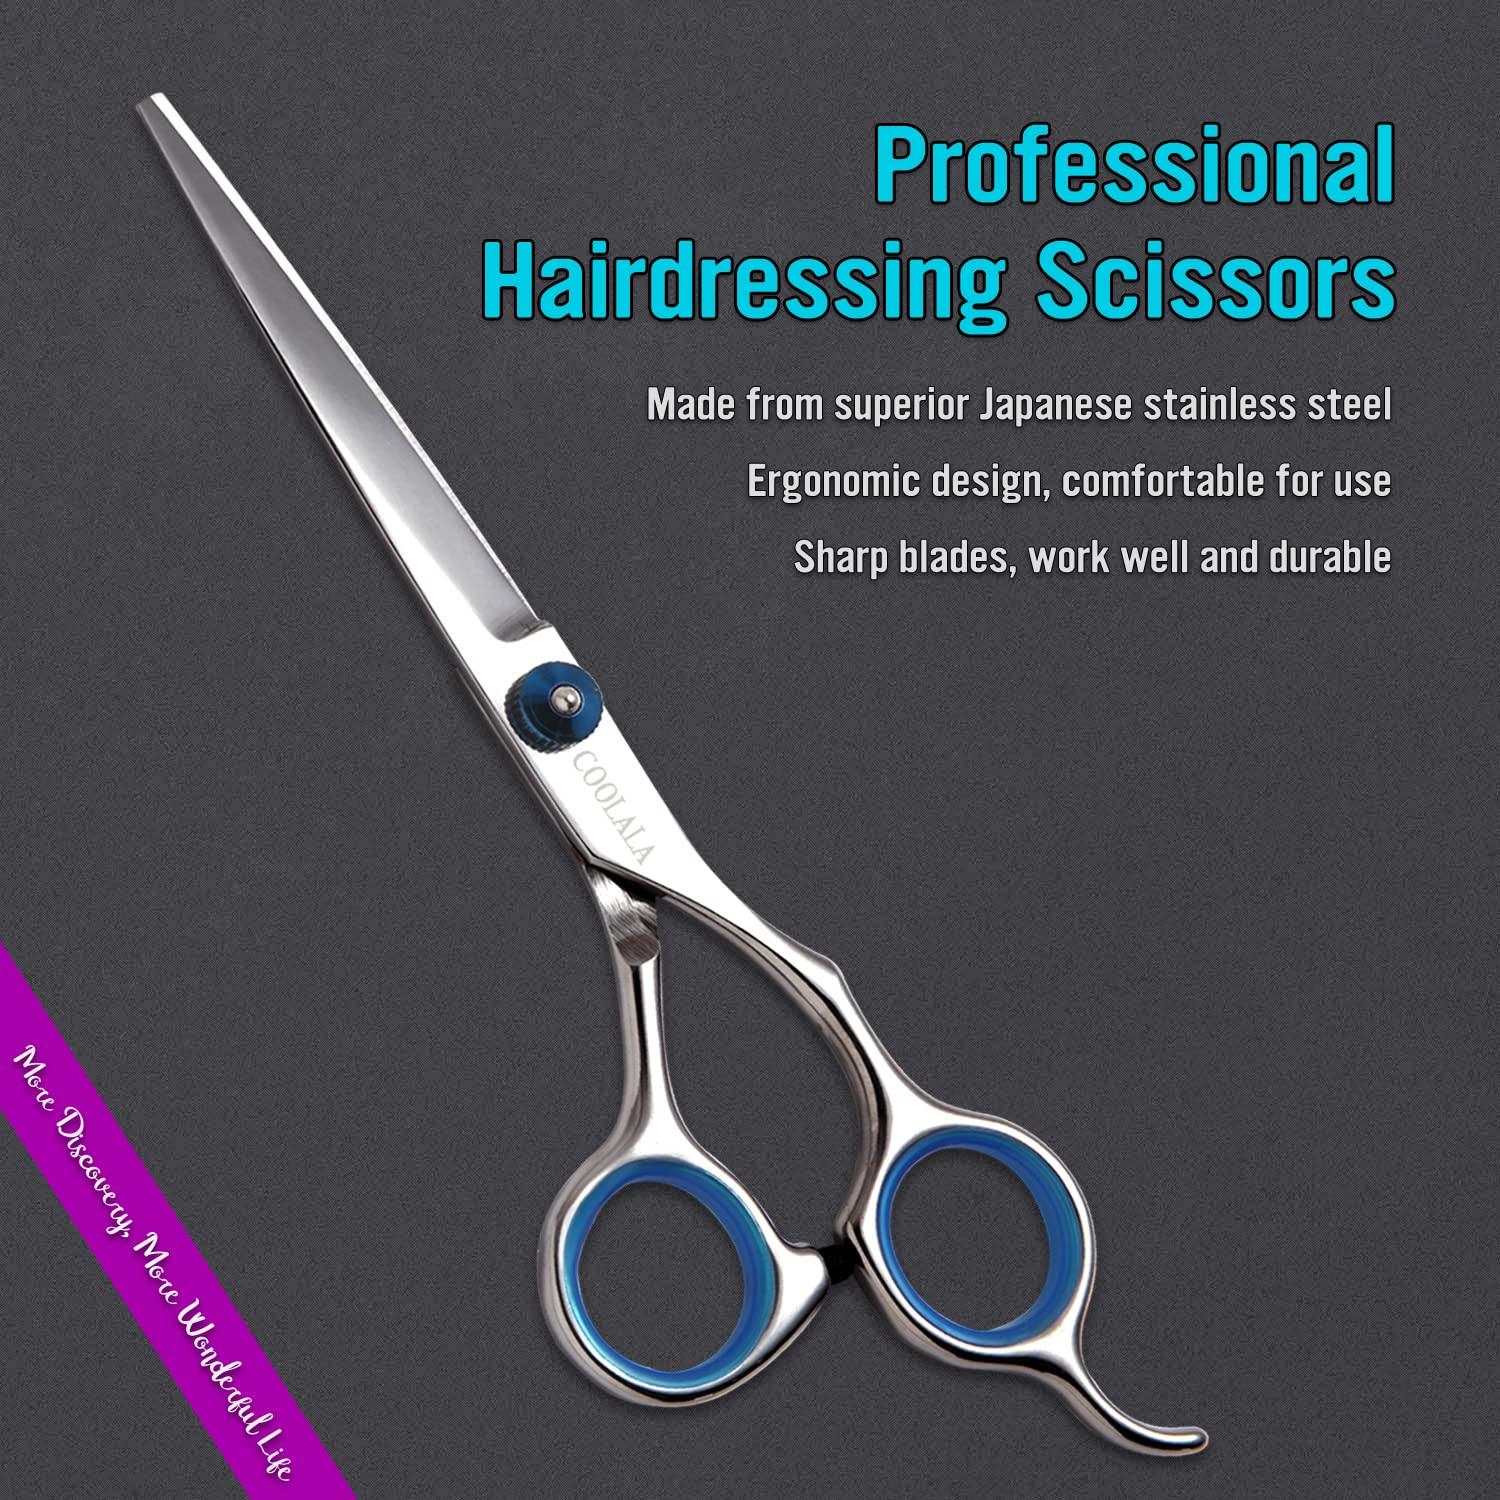 COOLALA Stainless Steel Hair Cutting Scissors 6.5 Inch Hairdressing Razor  Shears Professional Salon Barber Haircut Scissors, One Comb Included, Home  Use for Man Woman Adults Kids Babies